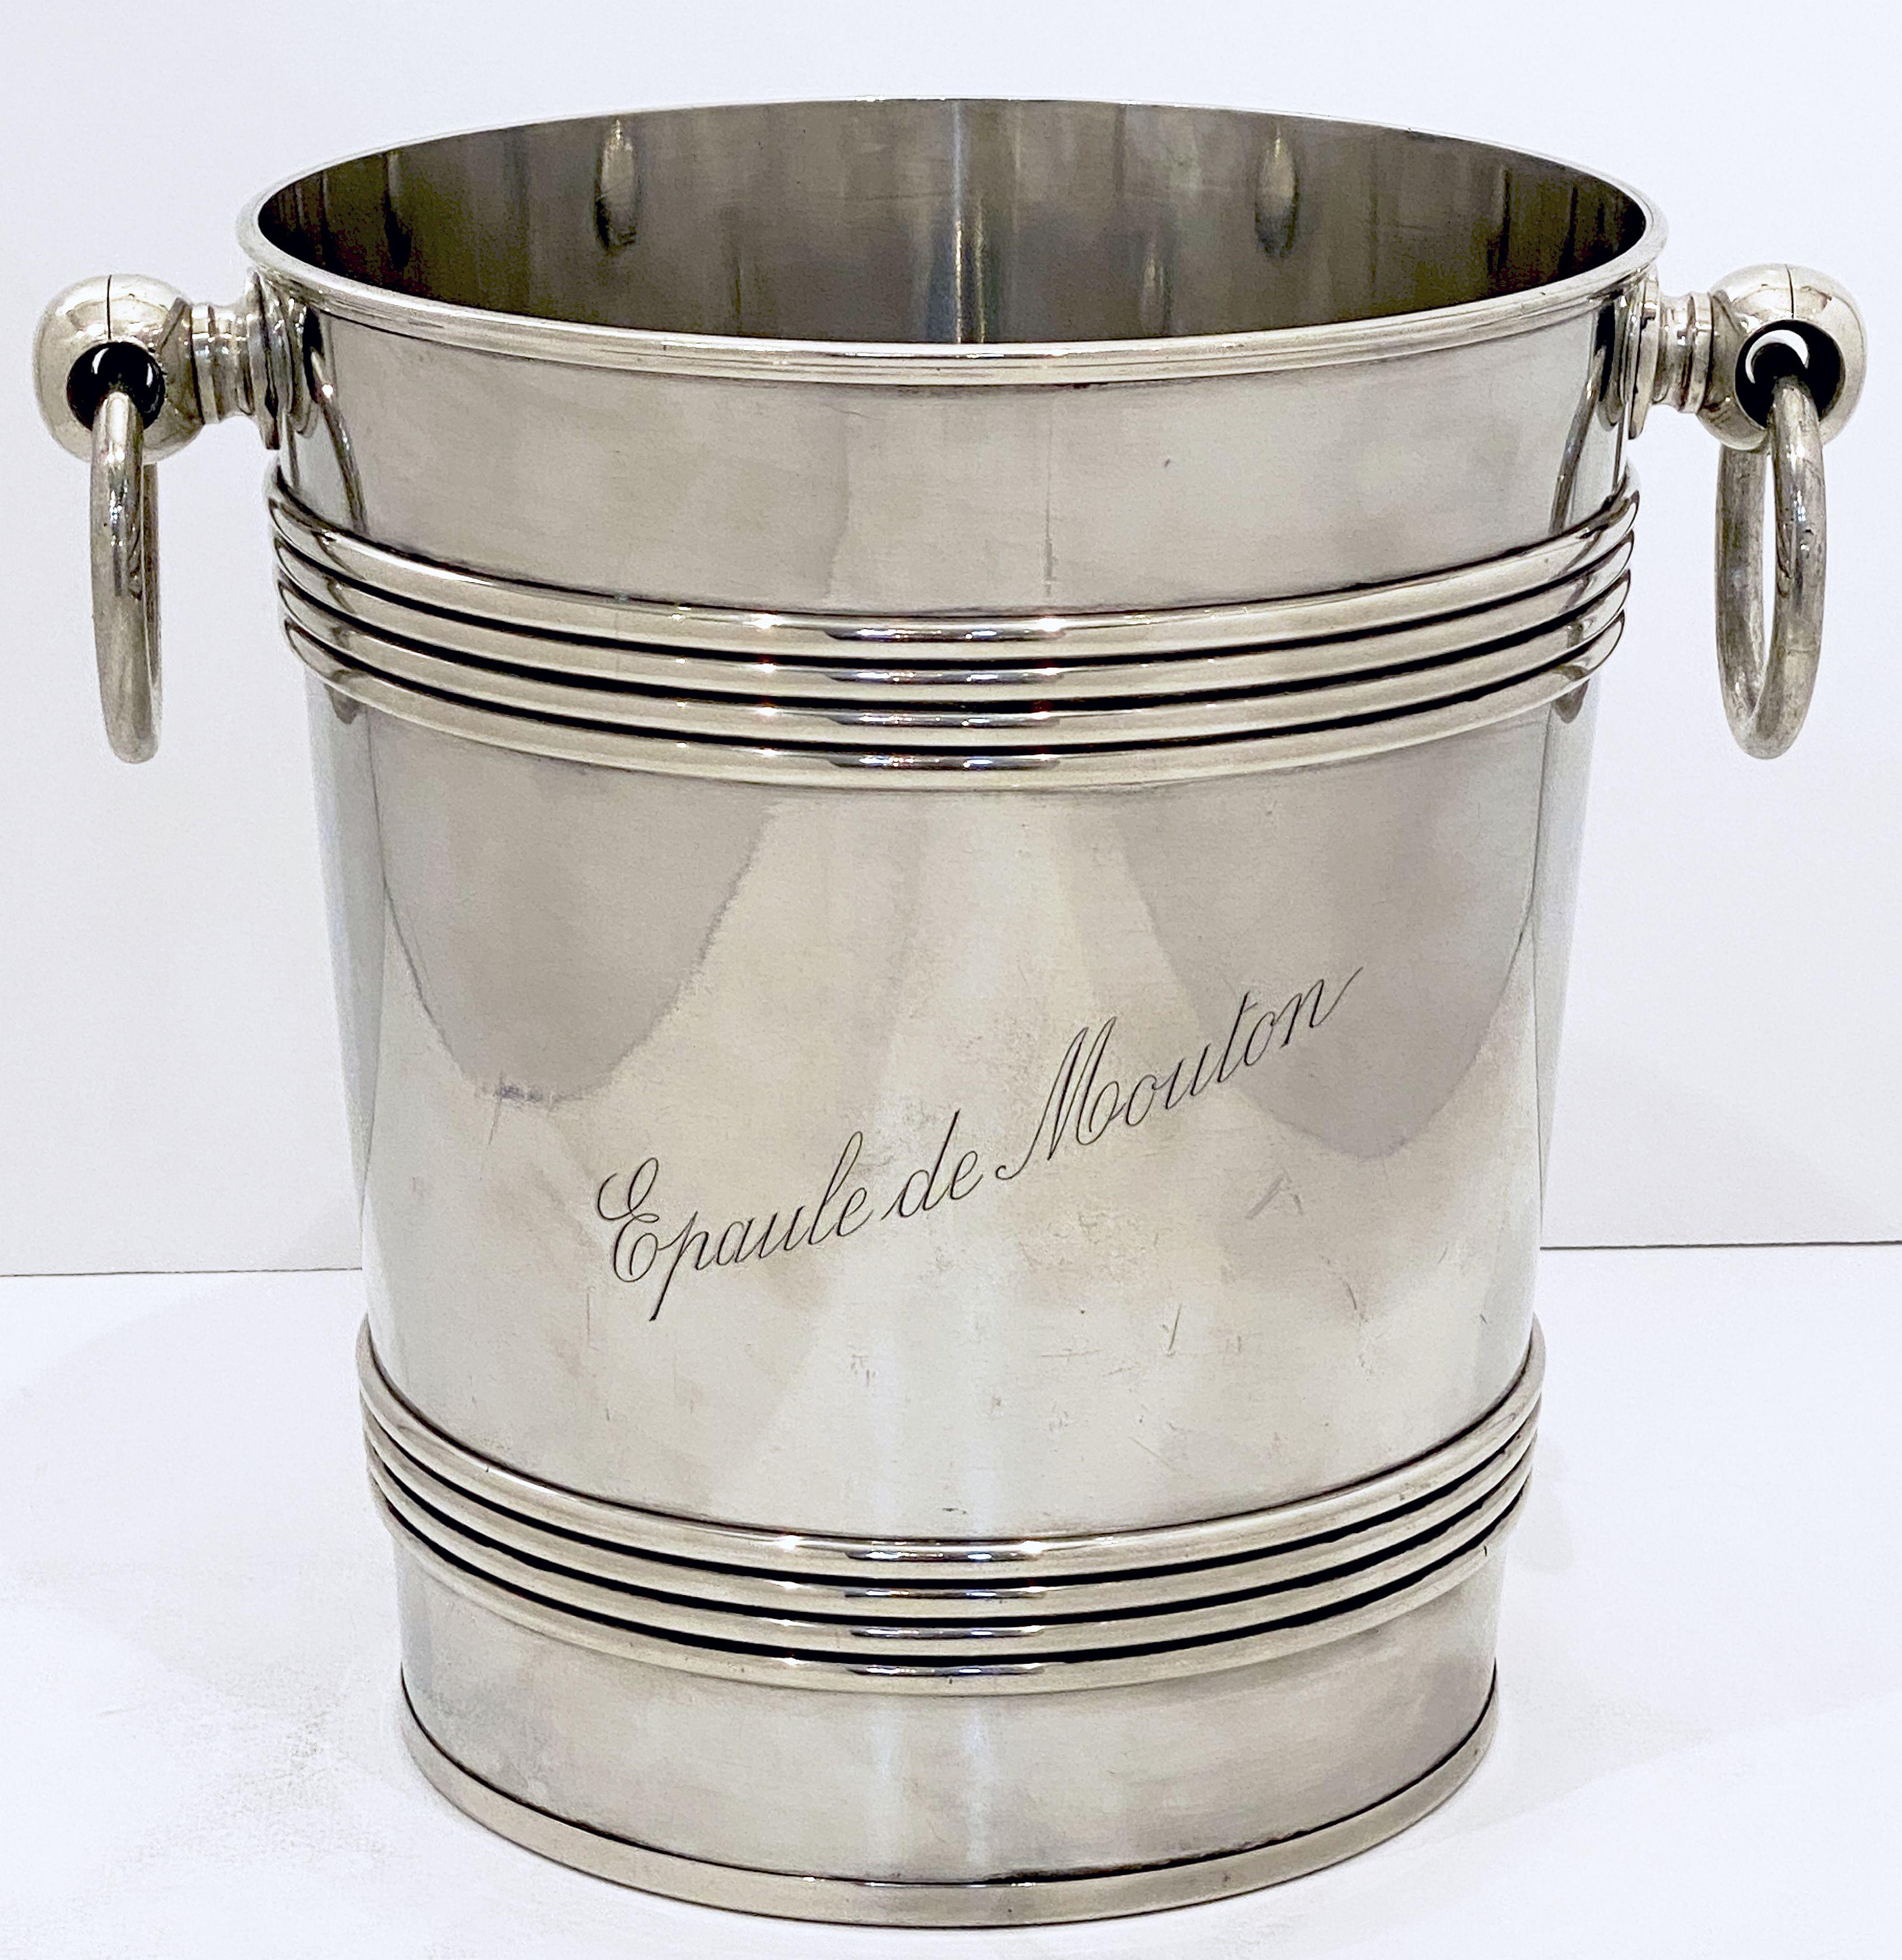 A fine extra large French ice bucket or champagne wine cooler of fine plate silver, featuring a rolled top edge, two opposing ring handles, banded rings around the top and base of the body - fitted for magnum-sized bottles of champagne and